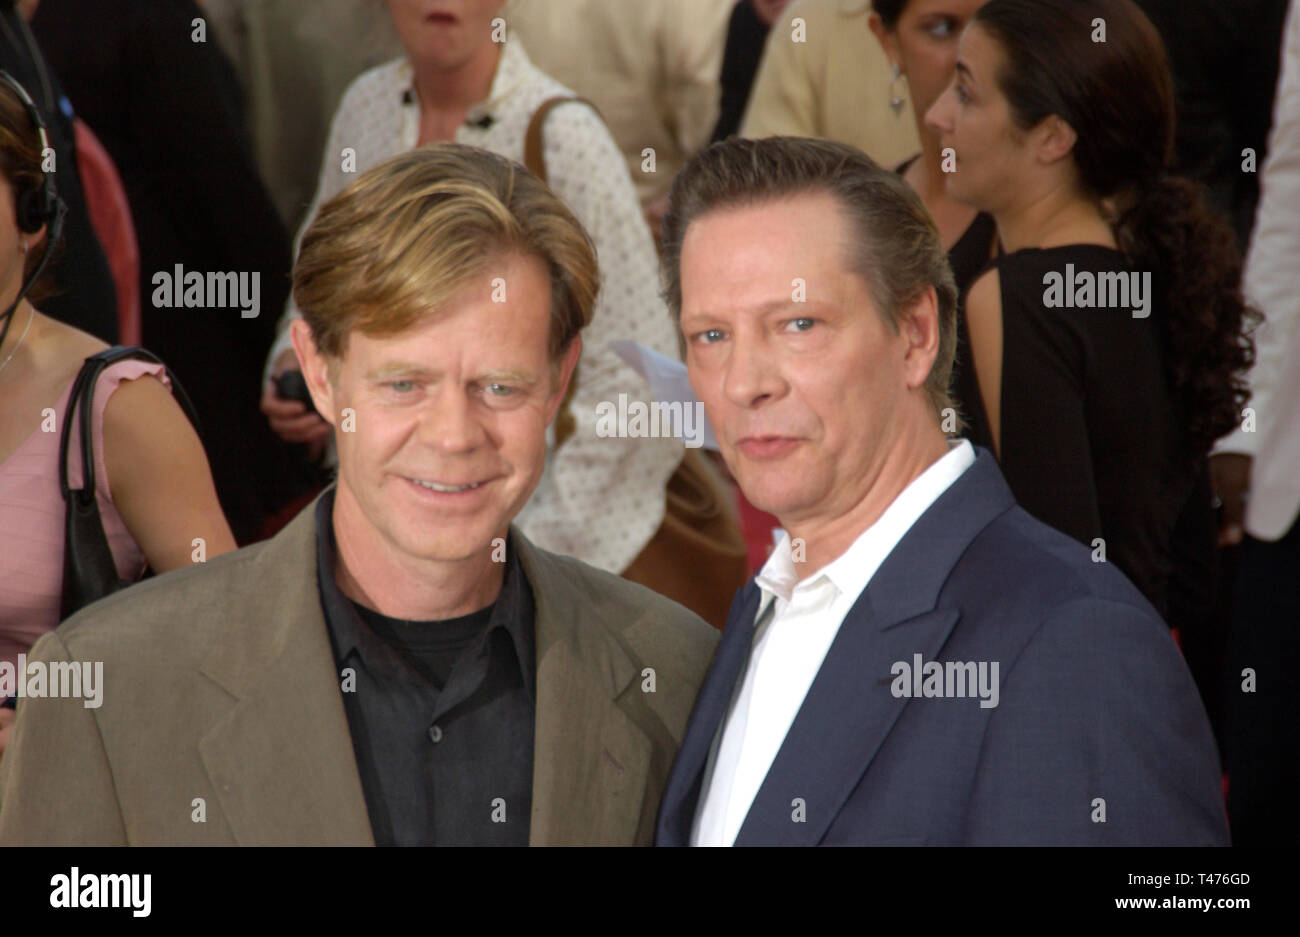 LOS ANGELES, CA. July 22, 2003: Actors WILLIAM H. MACY (left) & CHRIS COOPER at the world premiere, in Los Angeles, of their new movie Seabiscuit. Stock Photo